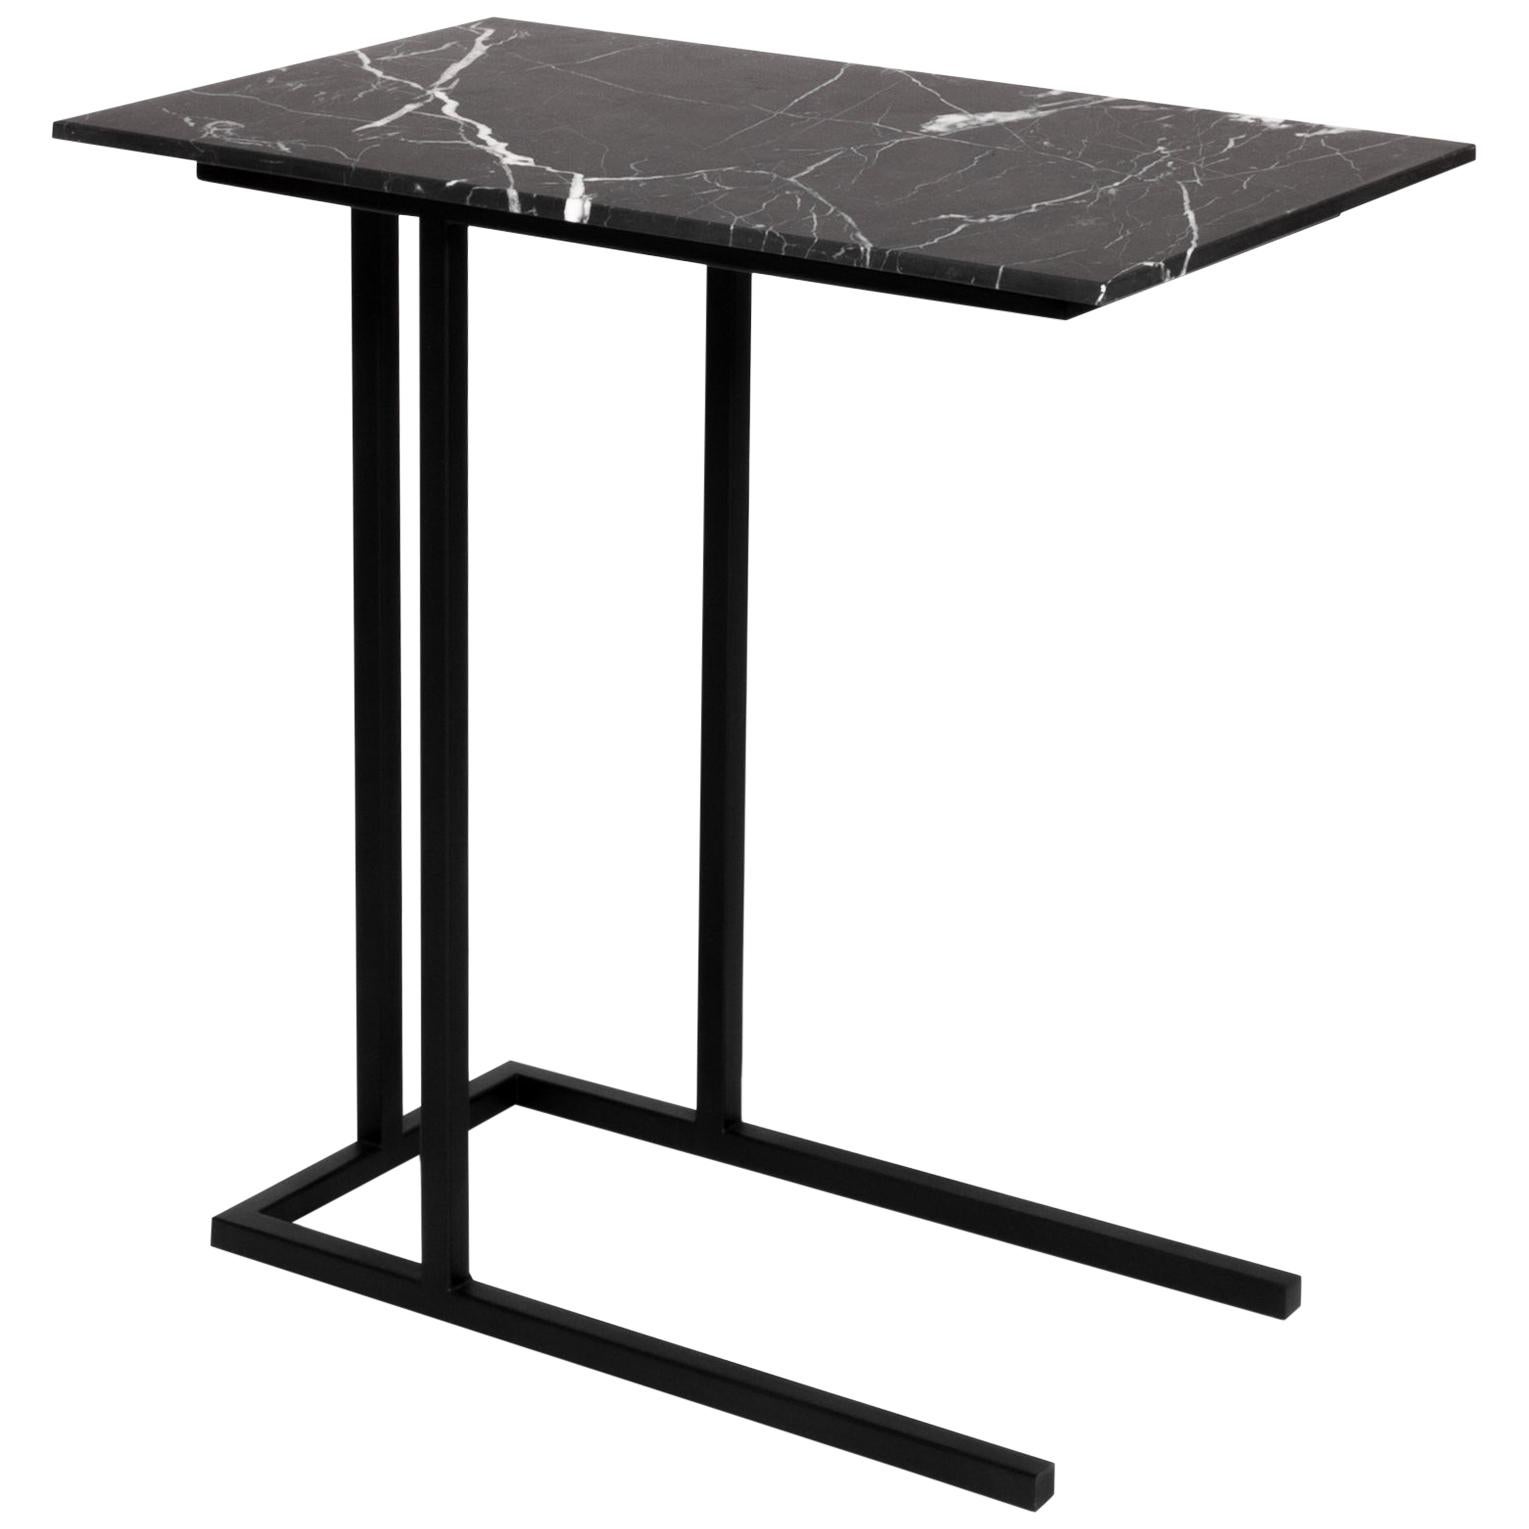 Grapa steel and black marble staple Side Table